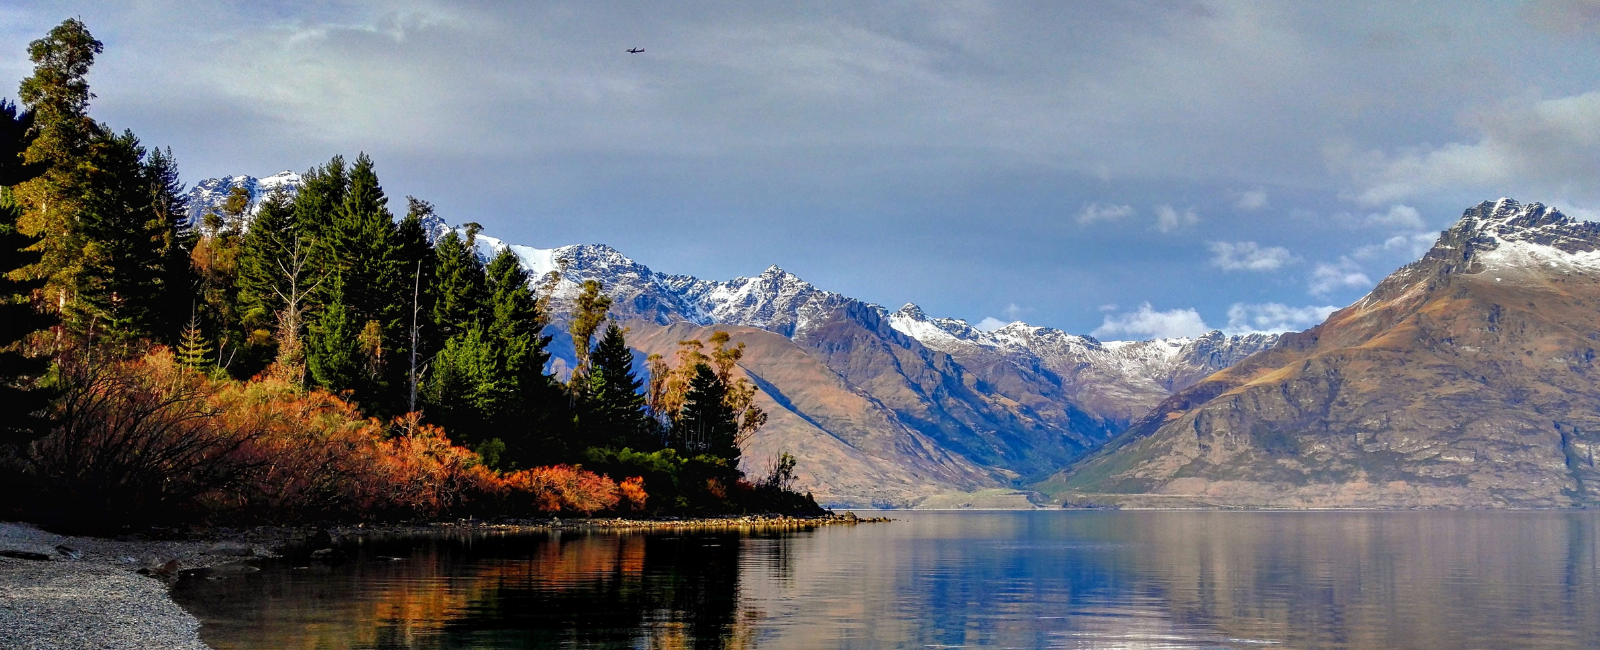 Lake and mountains in Queenstown